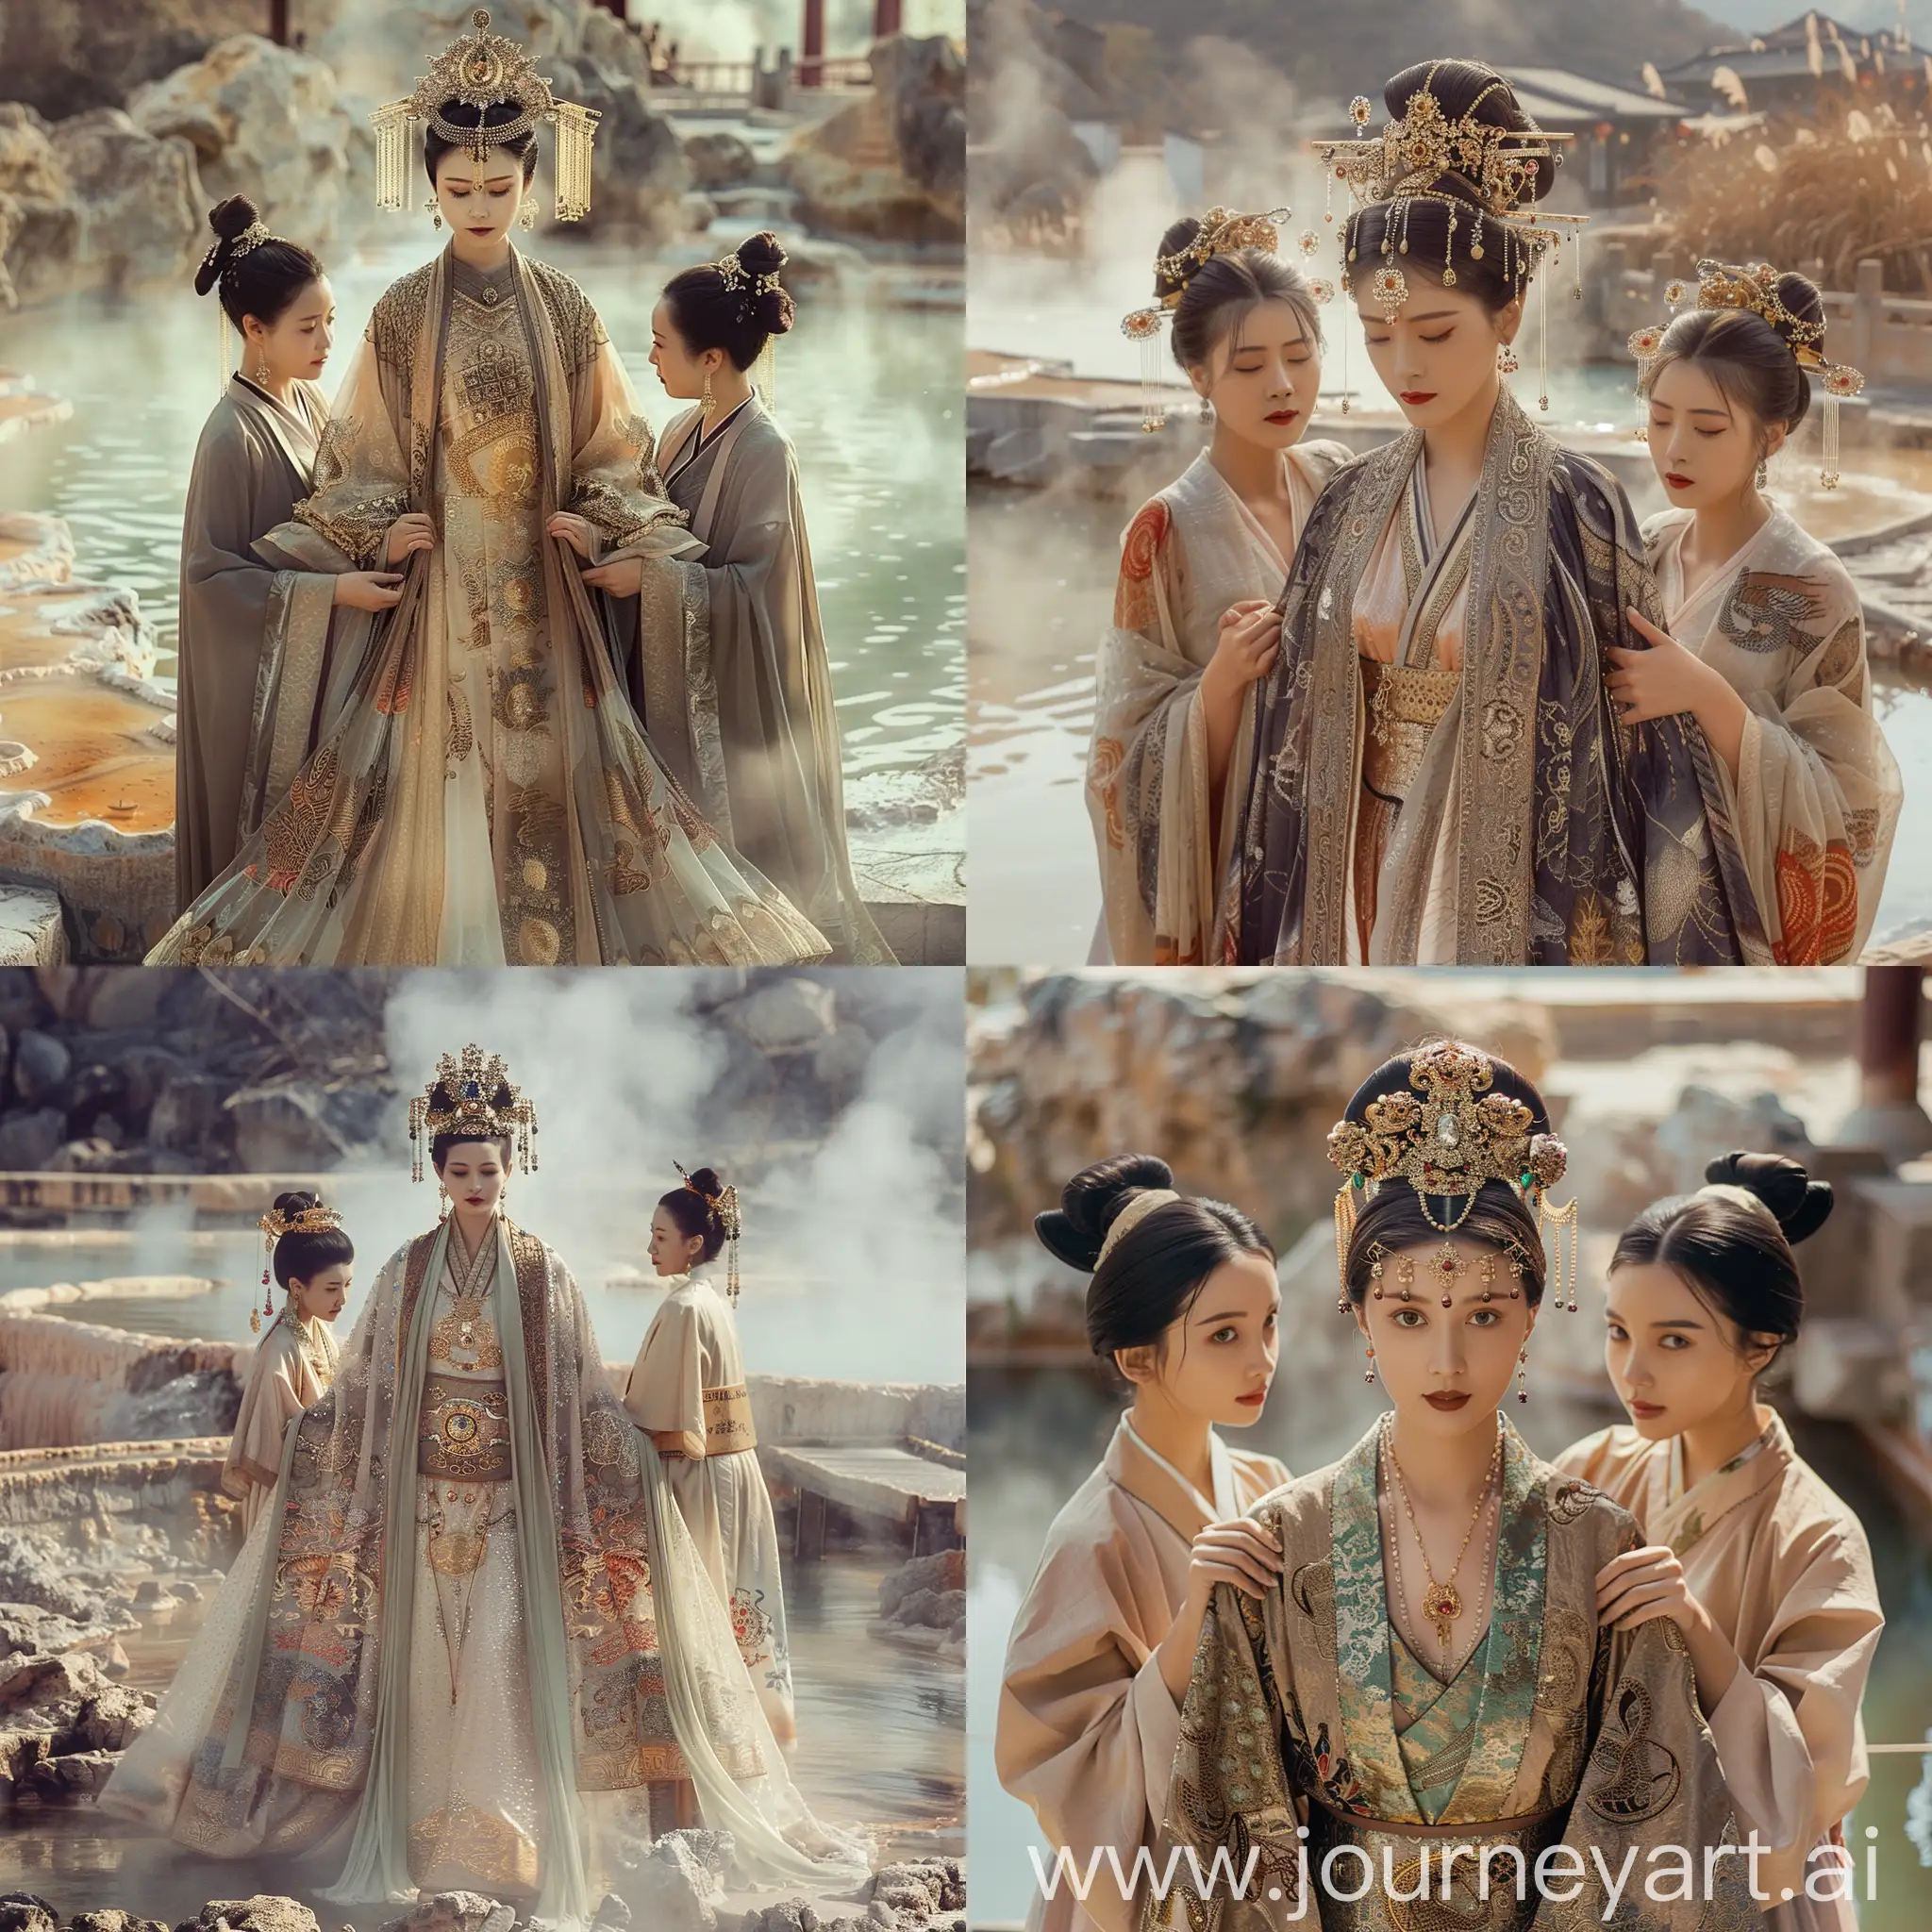 Elegant-Empress-and-Maids-by-a-Majestic-Hot-Spring-A-Panoramic-View-of-Ancient-Chinese-Luxury